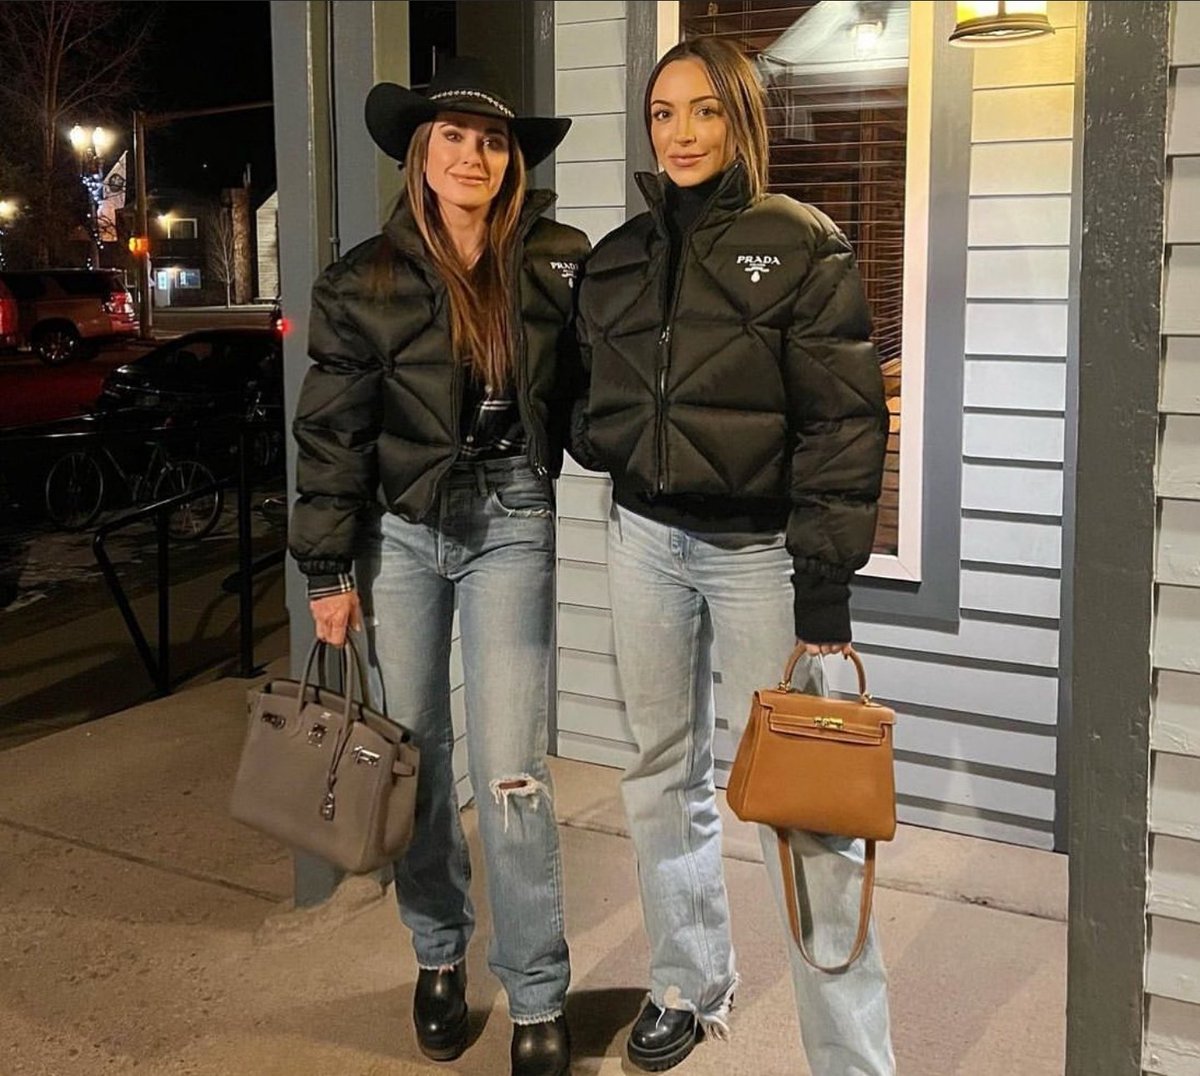 Kyle and Farrah are spending some mommy-daughter time in Aspen this weekend. Have you checked out Farrah's Netflix show, #BuyingBeverlyHills? What do you think? #RHOBH 💎